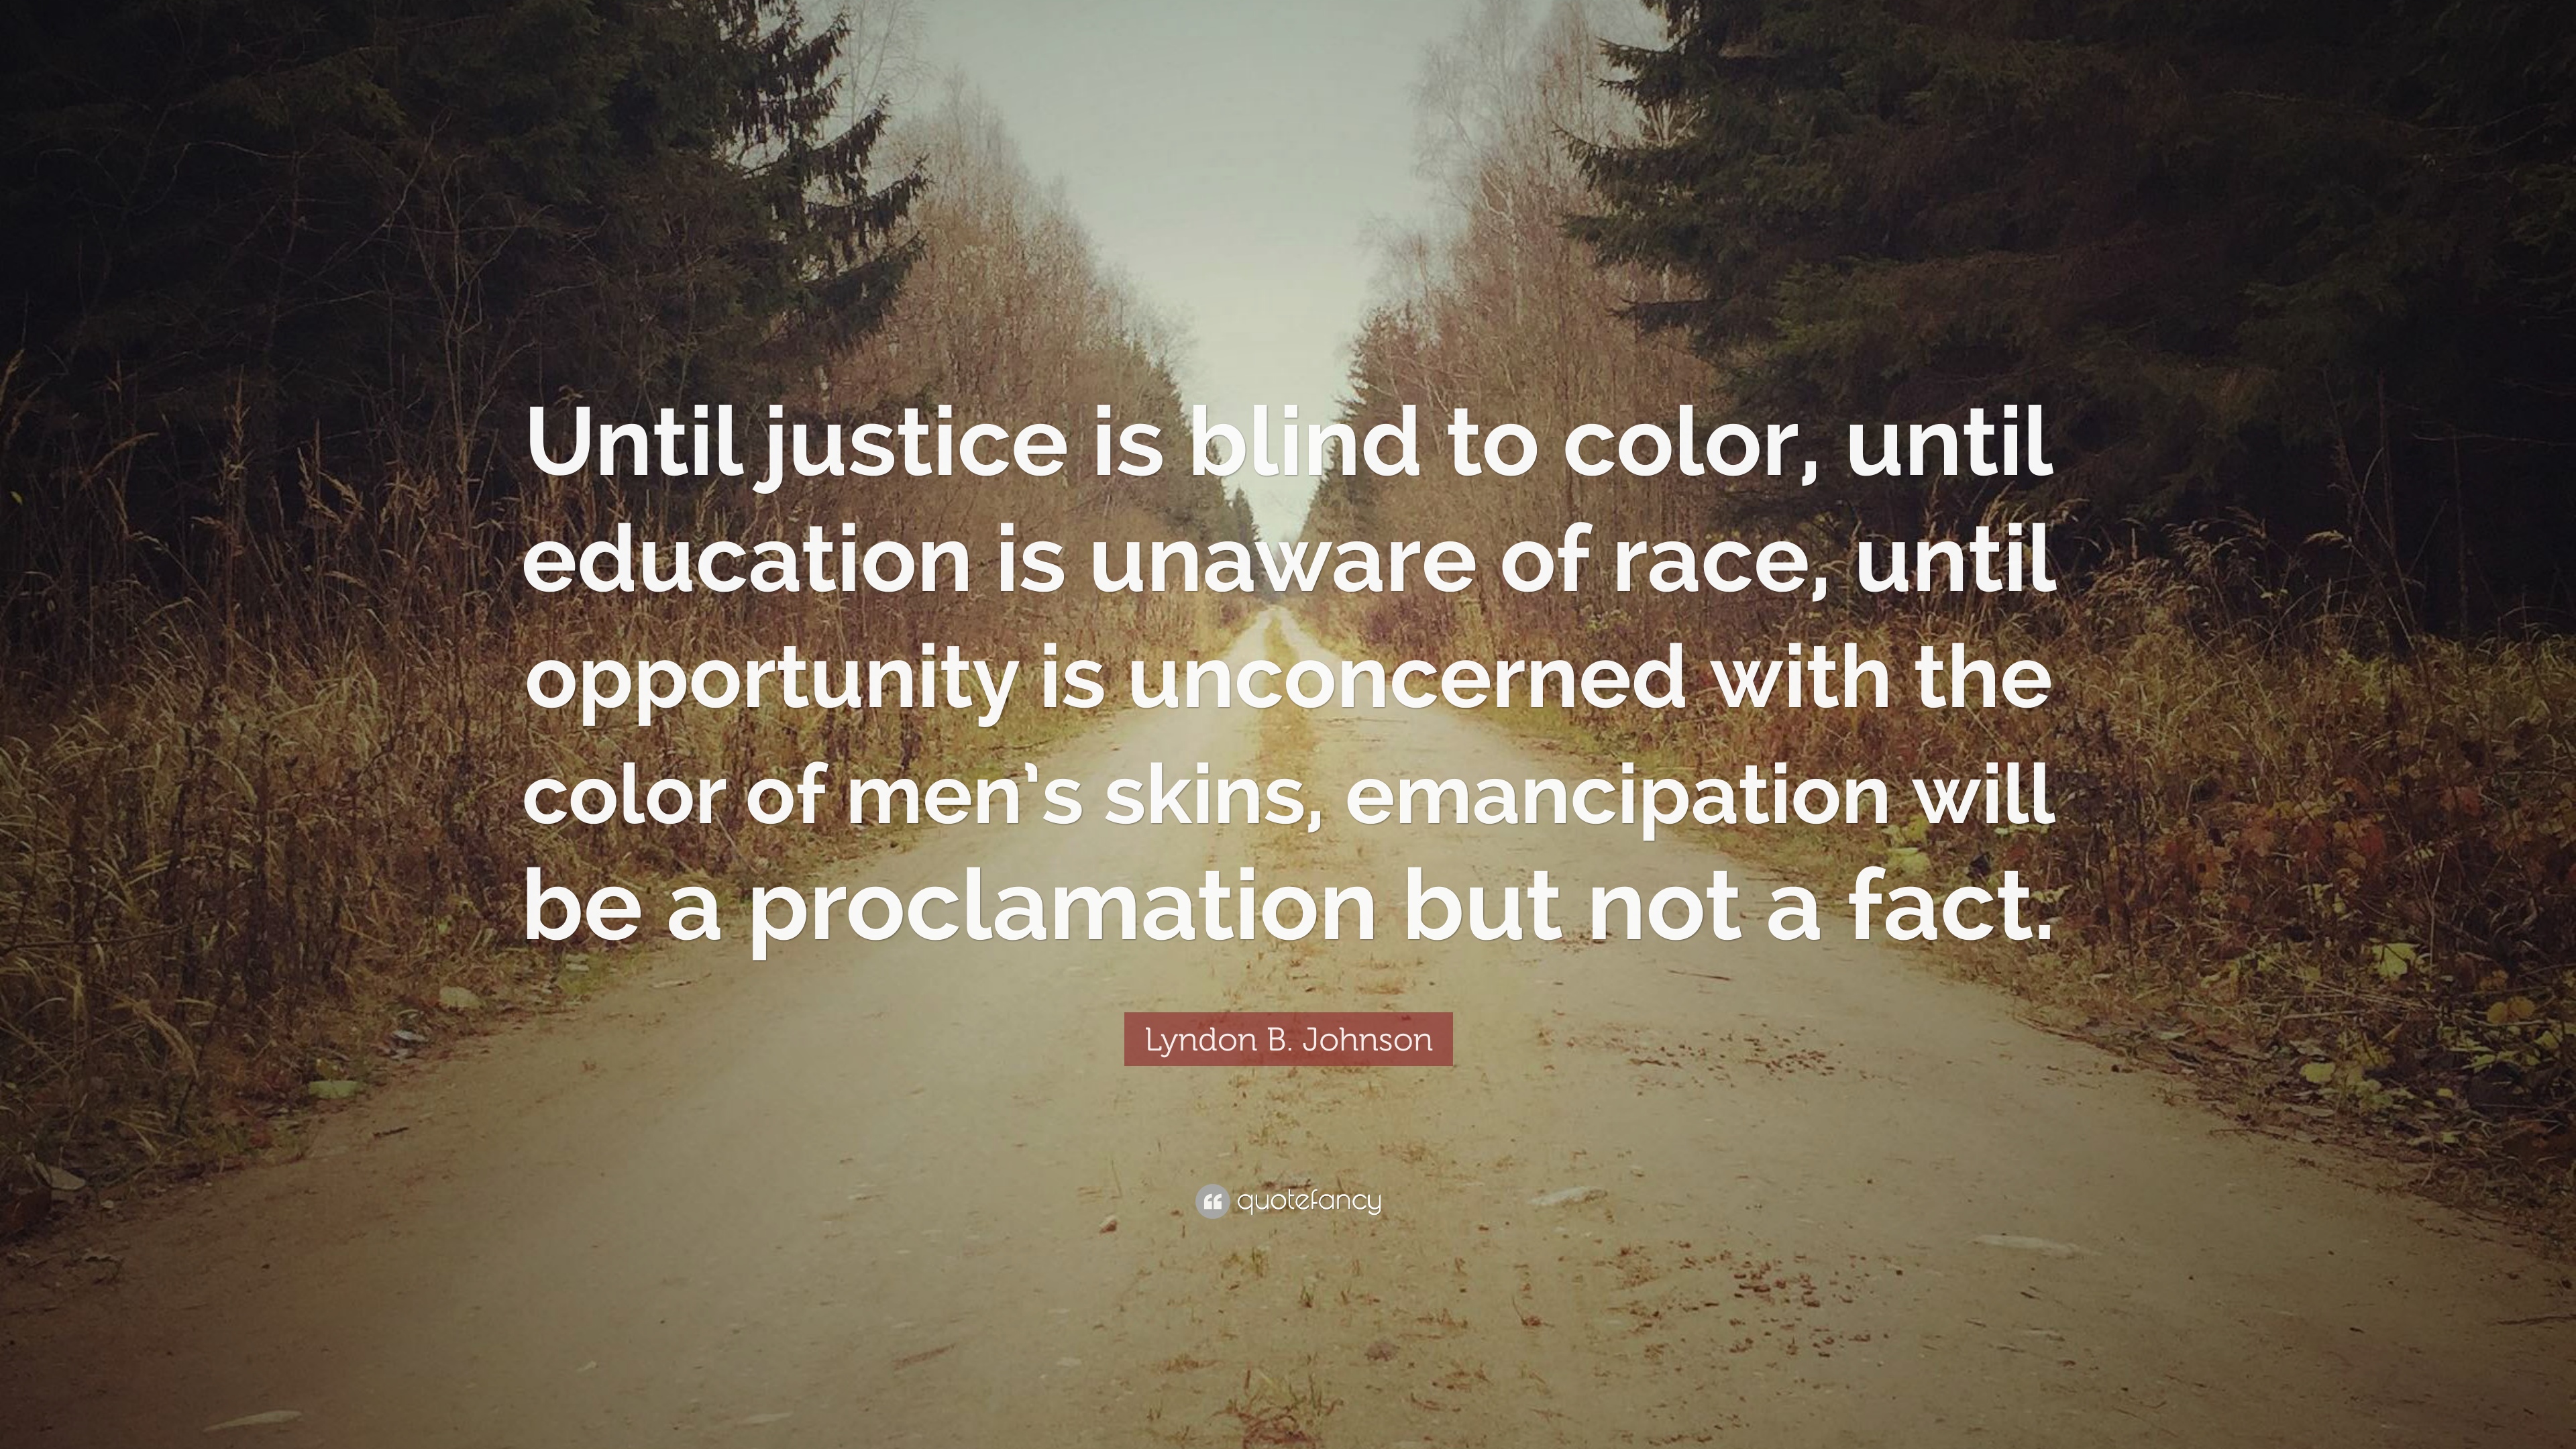 Lyndon B. Johnson Quote: “Until justice is blind to color, until